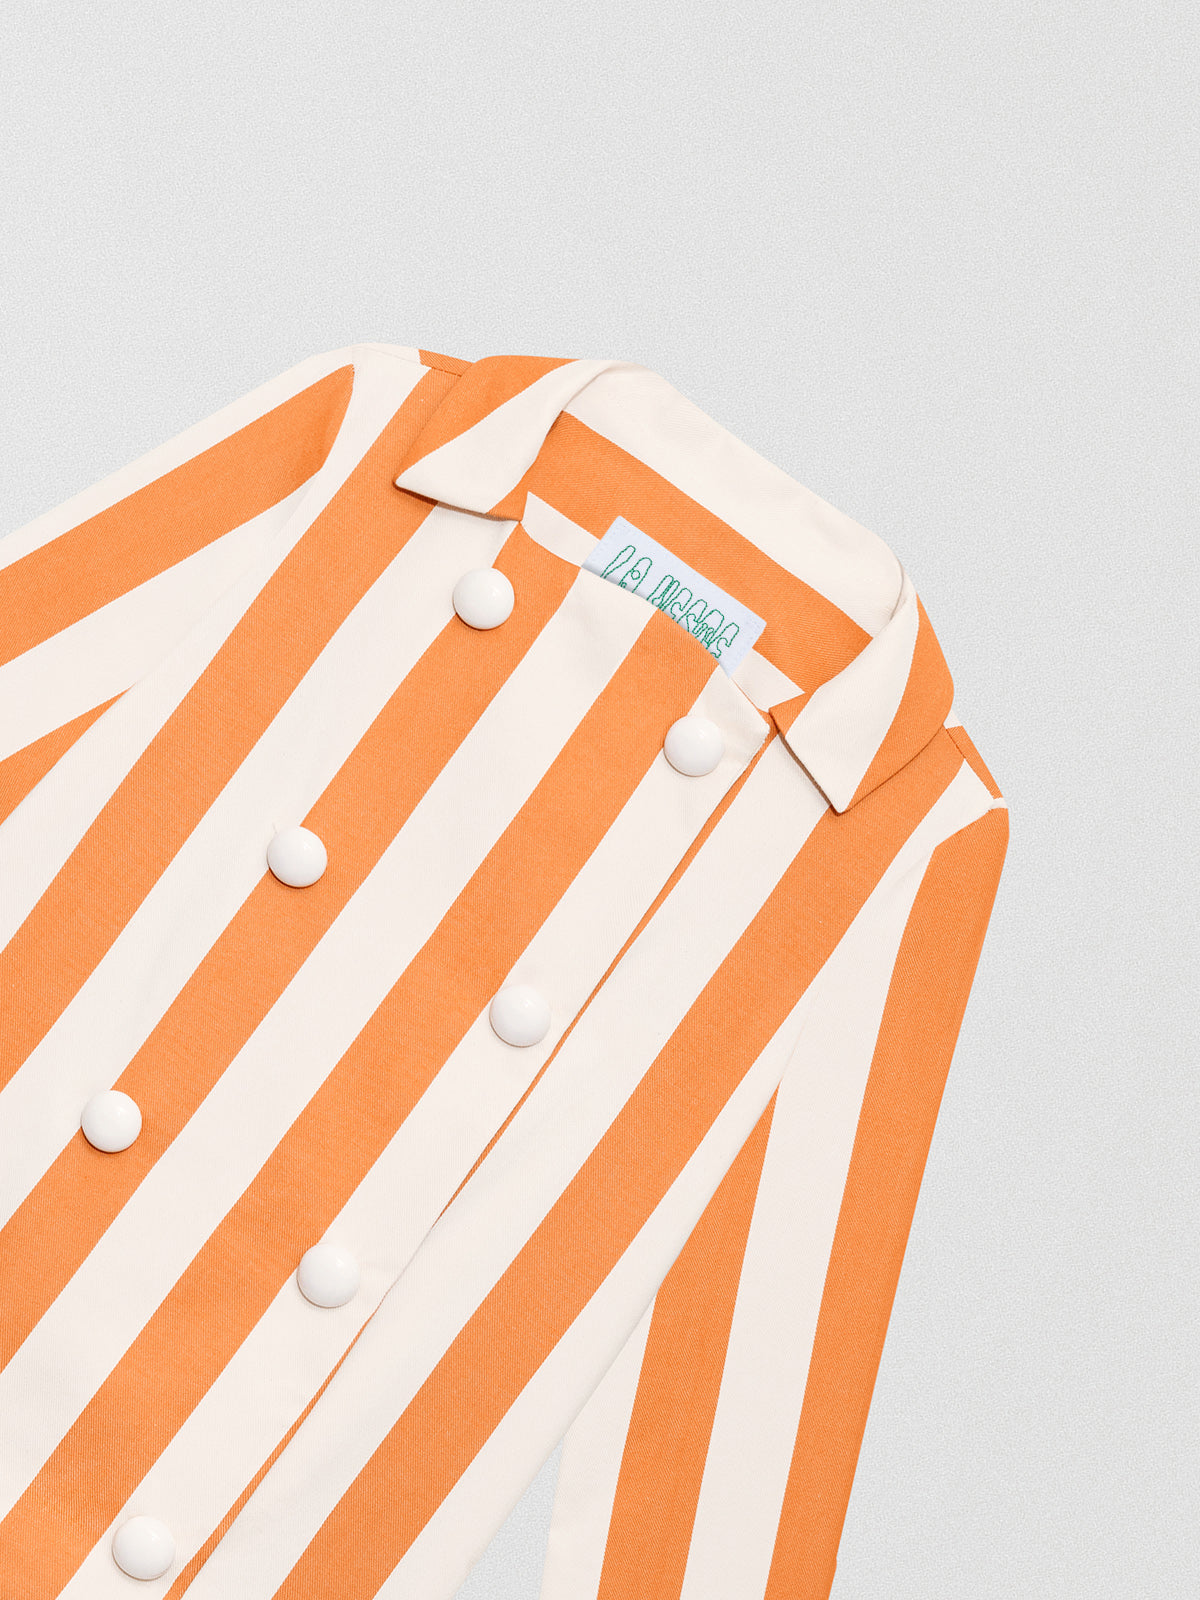 Orange and white striped jacket made of cotton with white XL buttons